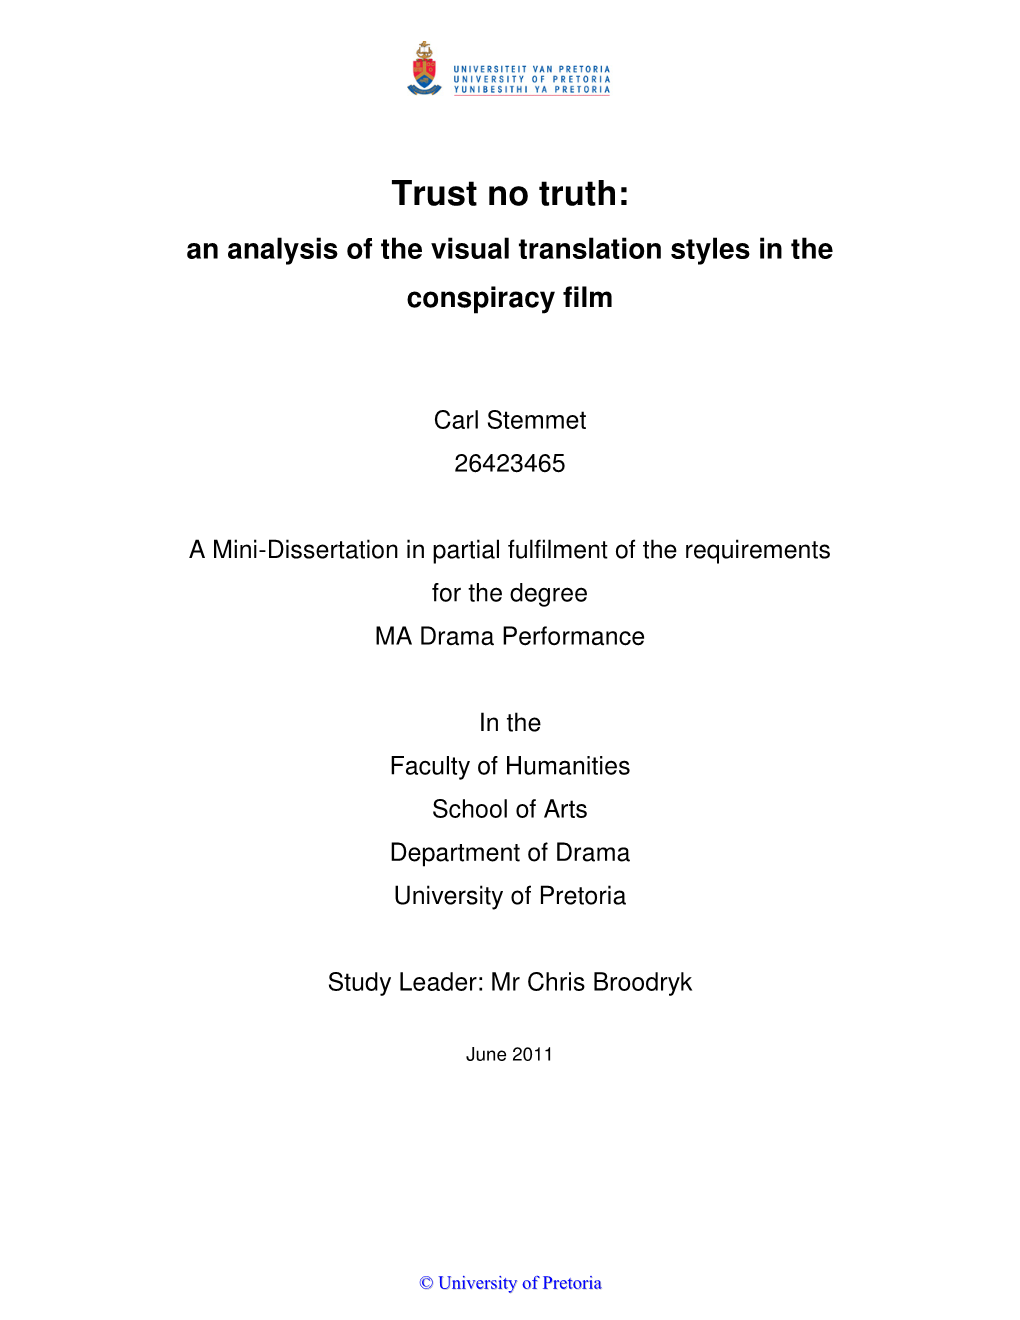 Trust No Truth: an Analysis of the Visual Translation Styles in the Conspiracy Film